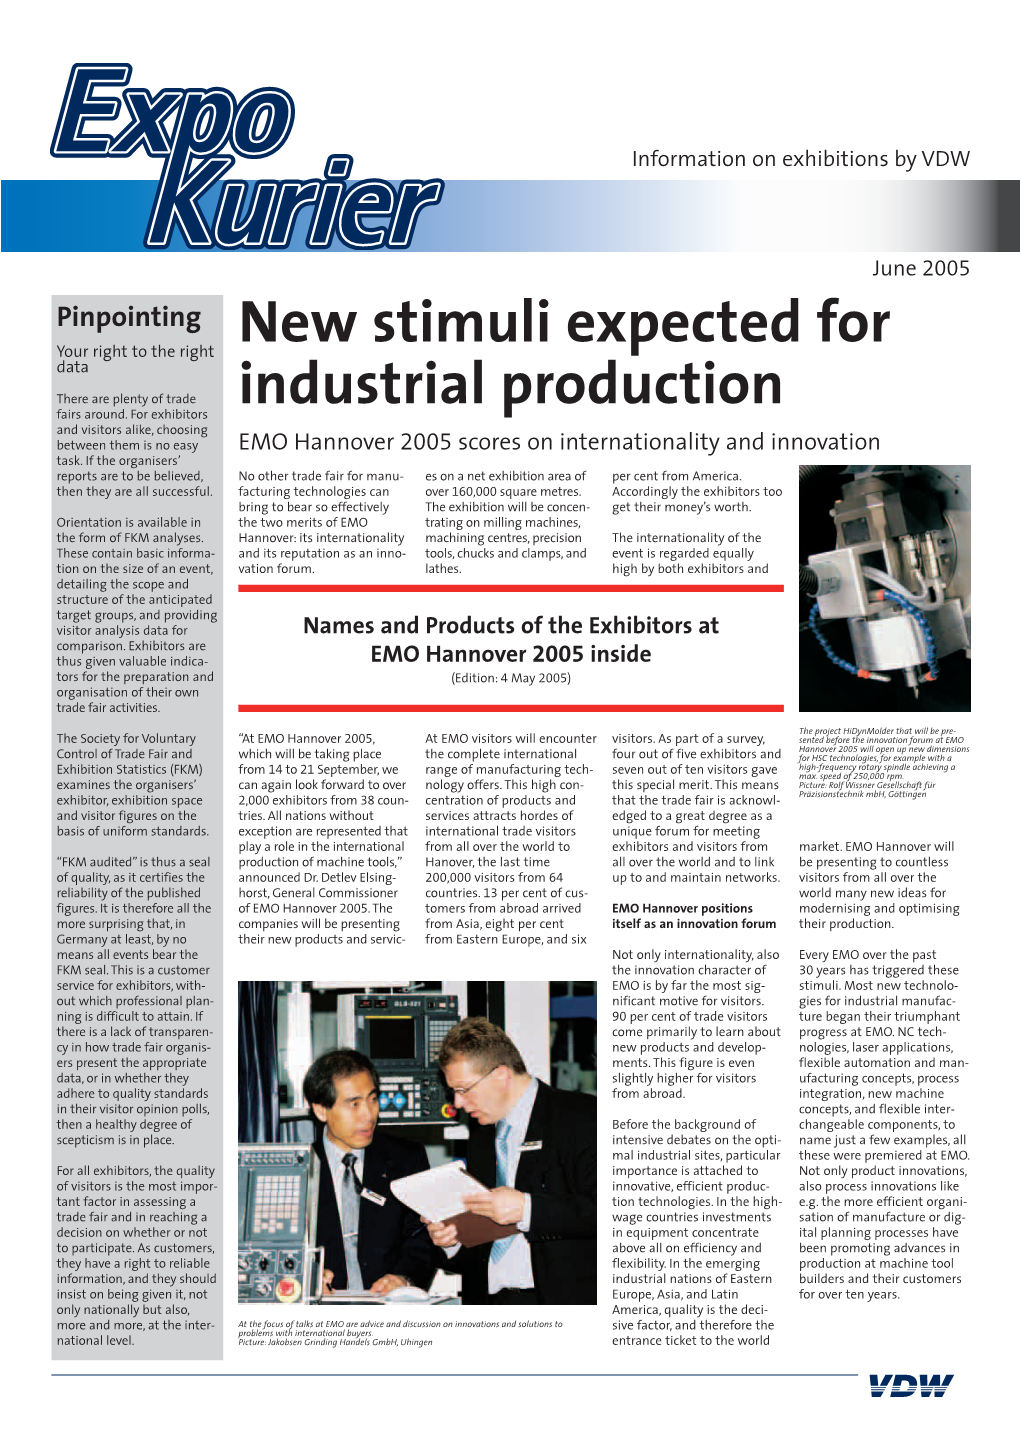 New Stimuli Expected for Industrial Production